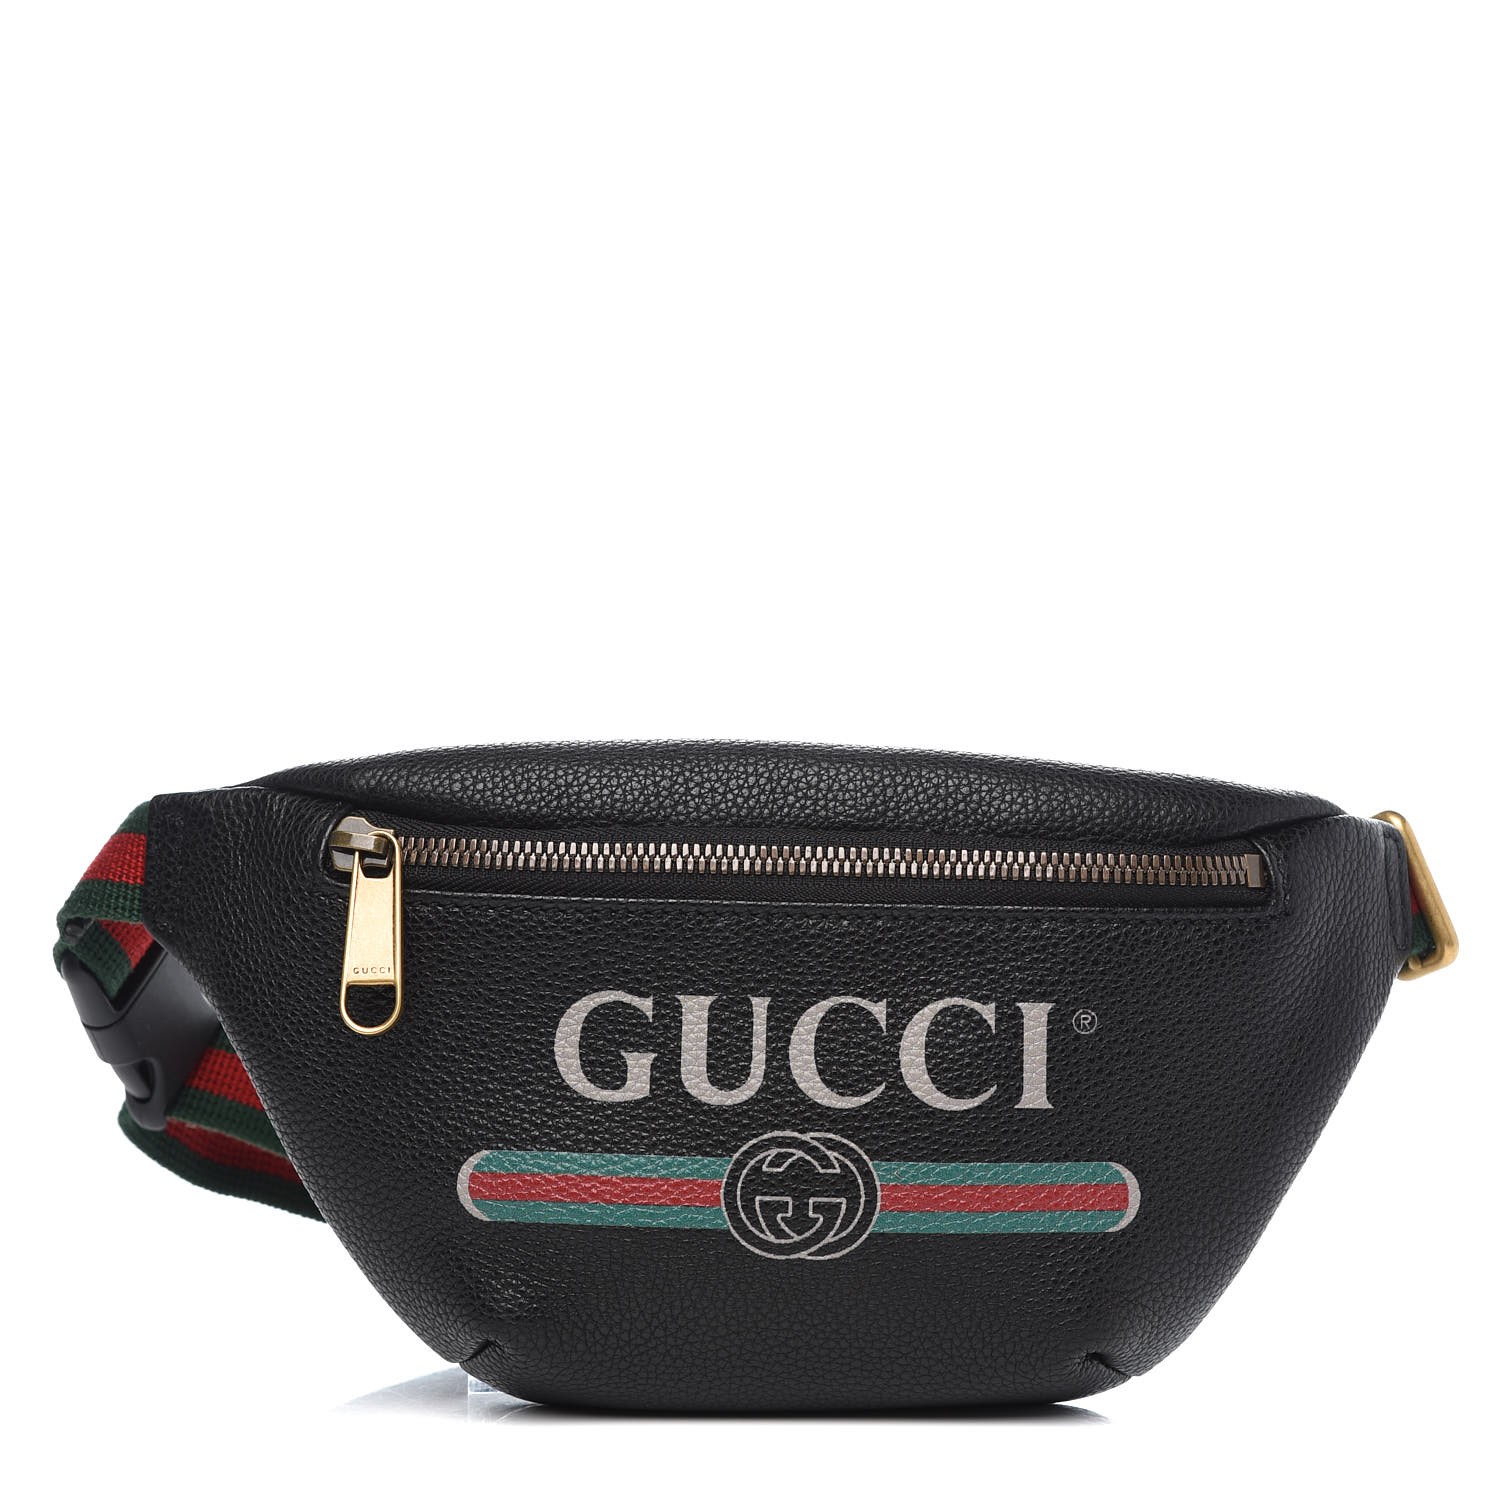 gucci fanny pack with writing on it